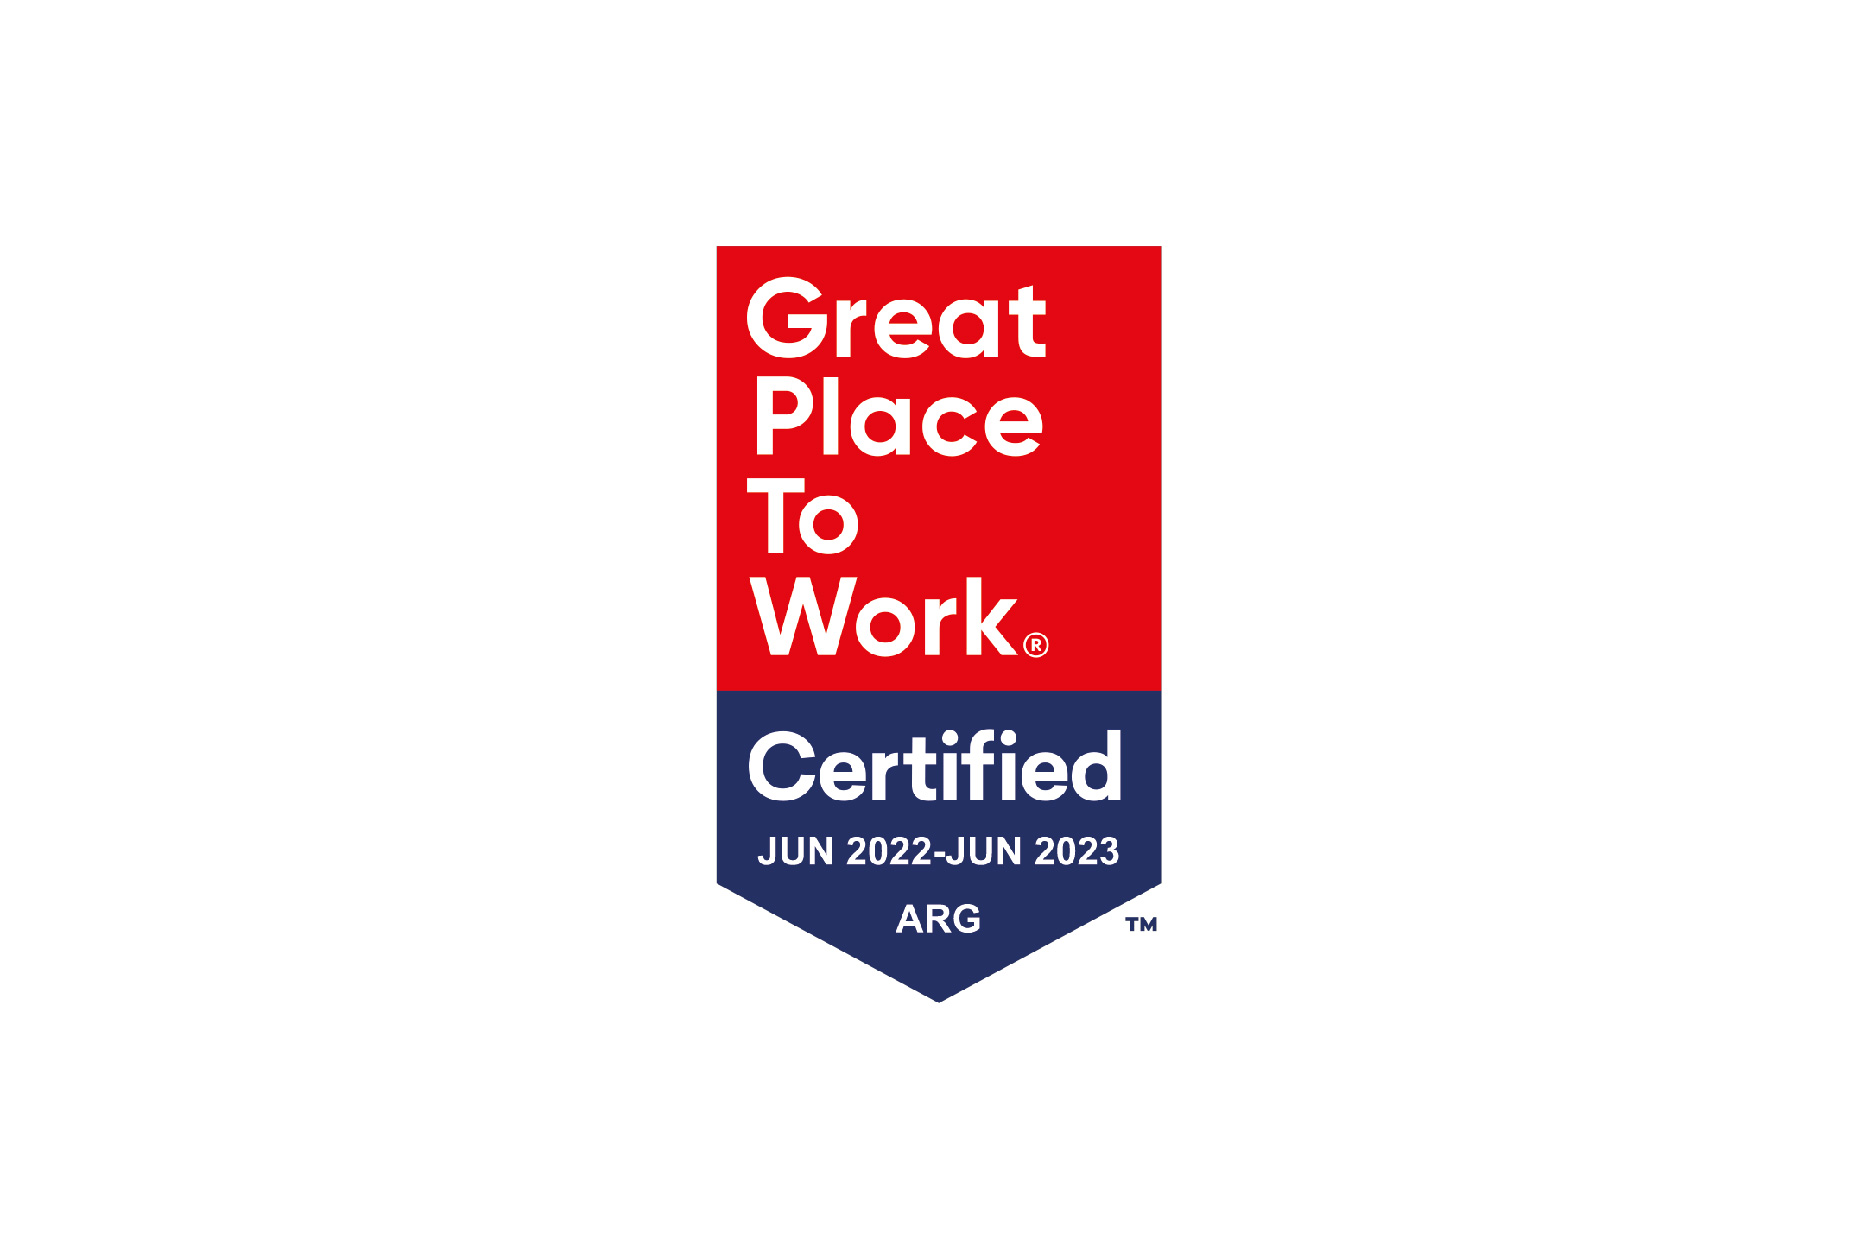 We are now a Great Place to Work!